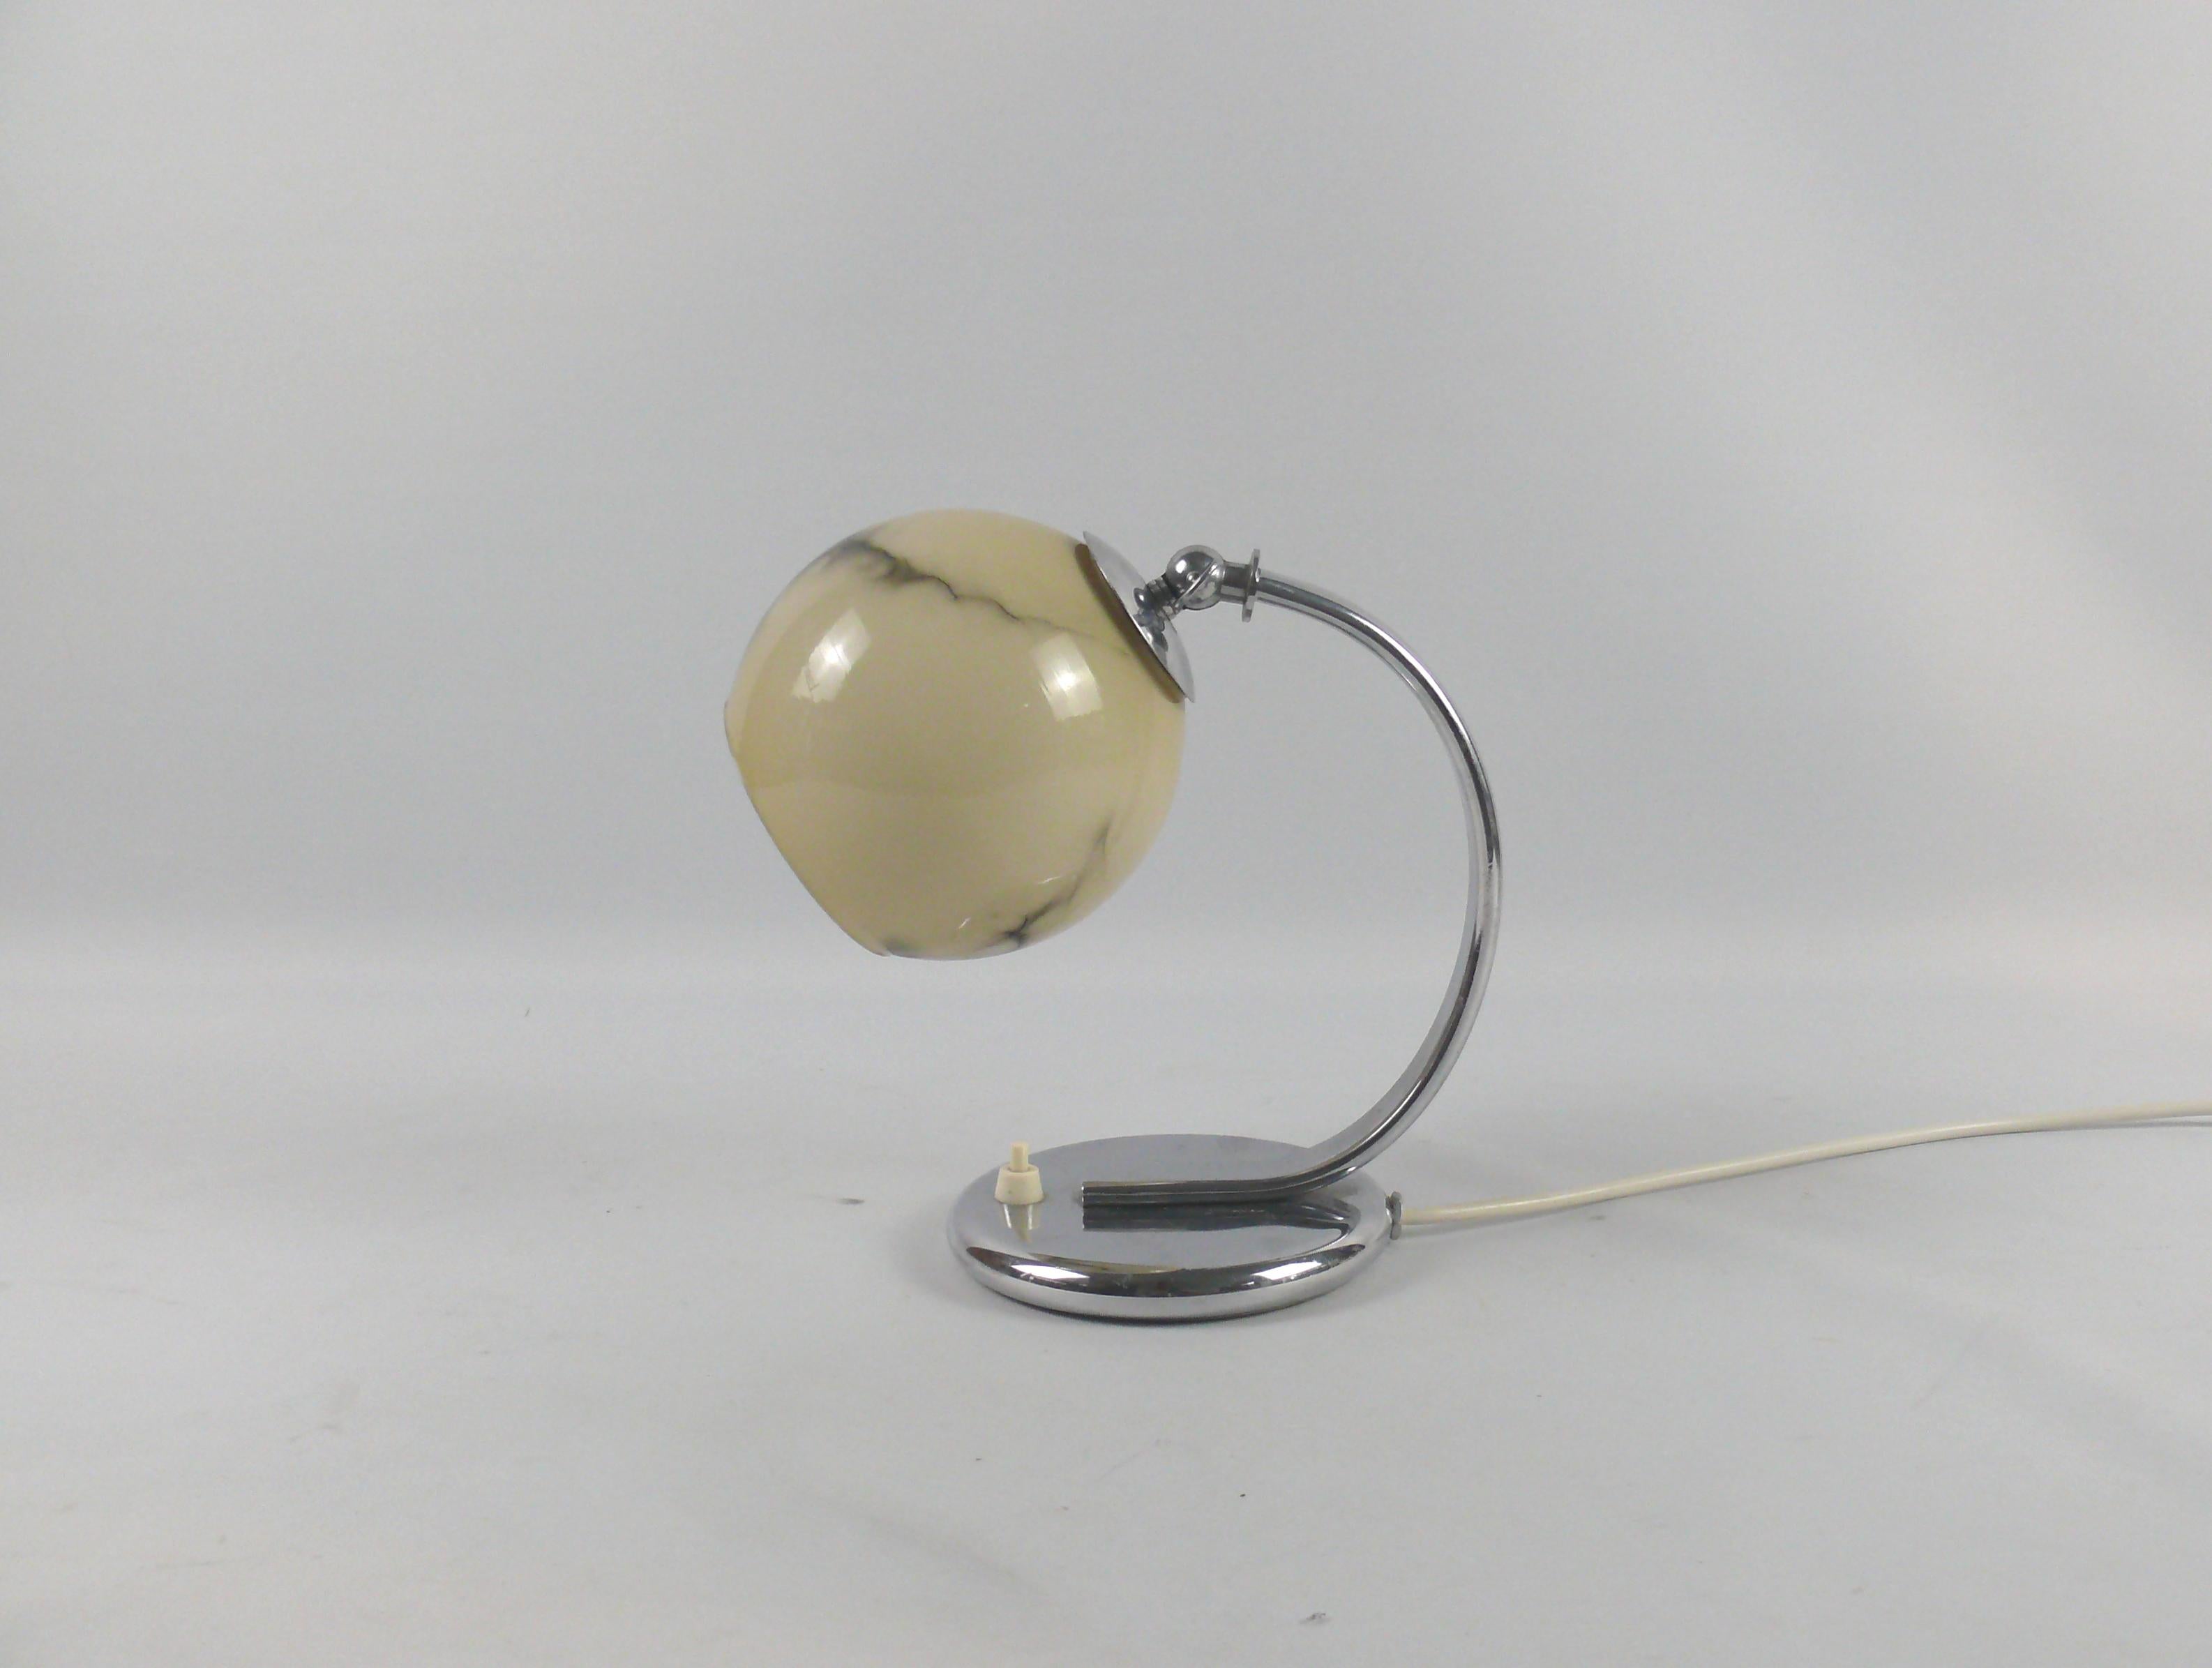 Mid century table lamp, probably from the 1930s - 1950s in good condition. The lamp impresses with its shiny chrome-plated round base and the decorative, marbled shade. The lamp is equipped with an E 27 brass socket and the height of the shade can